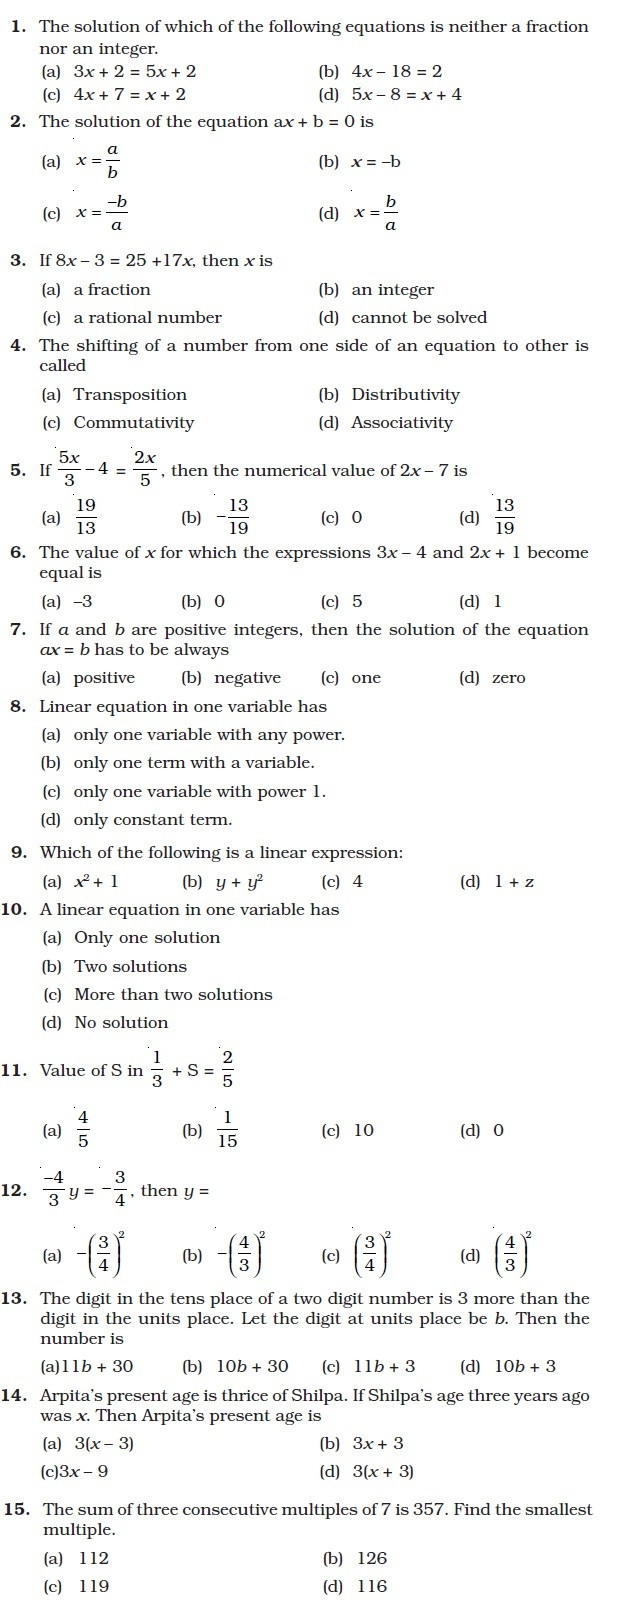 linear-equation-in-one-variable-worksheet-db-excel